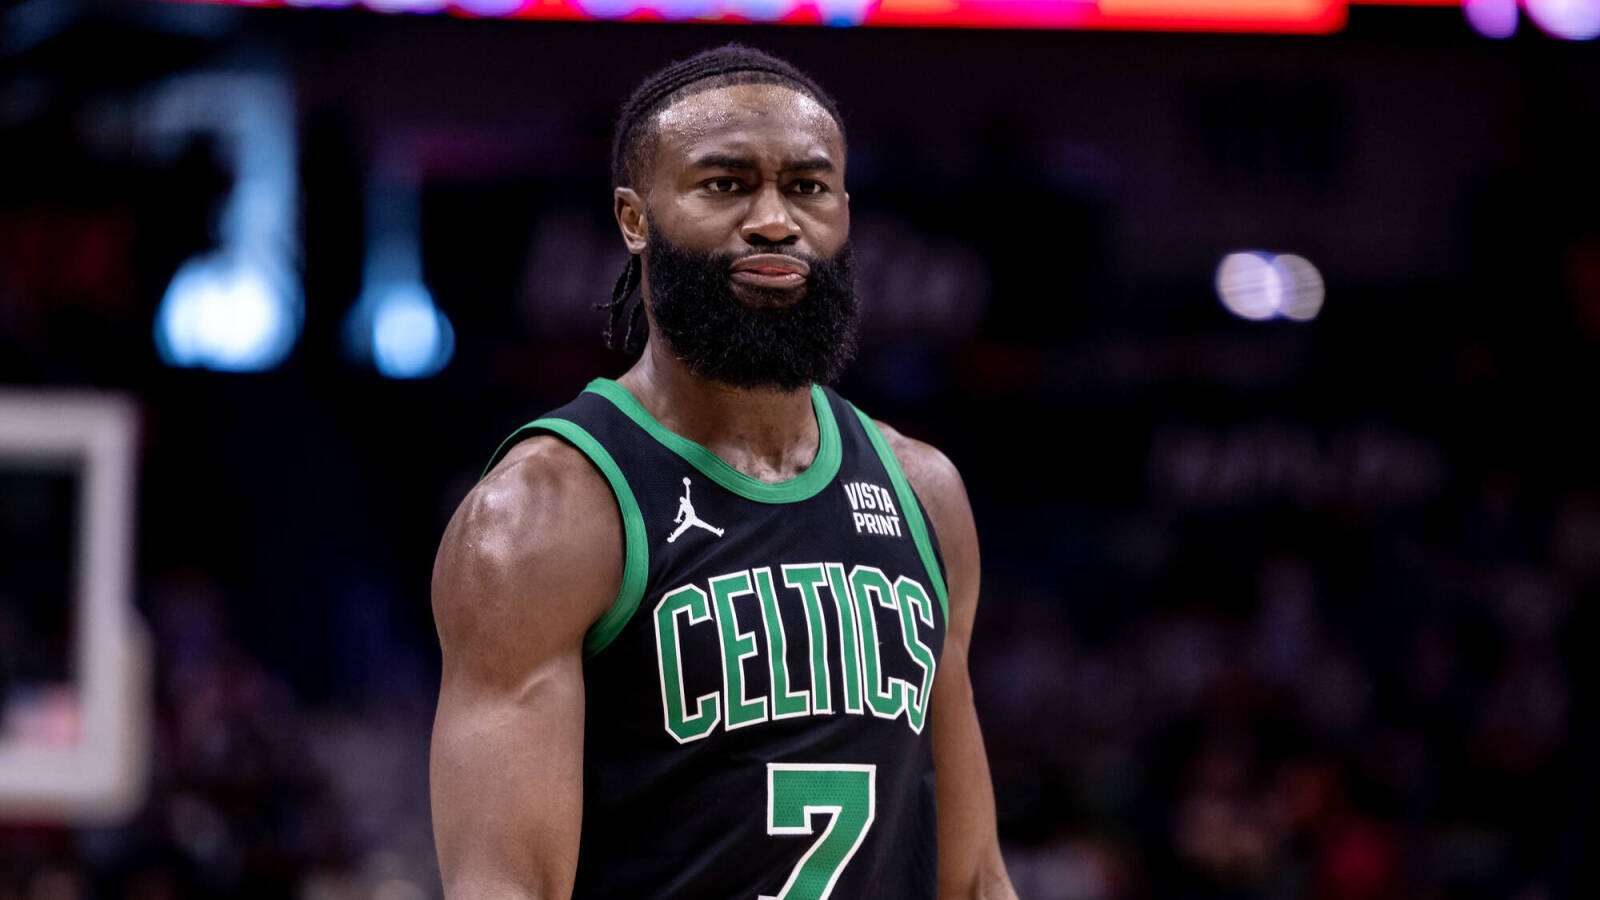 The Celtics need to rest Jaylen Brown ahead of the playoffs